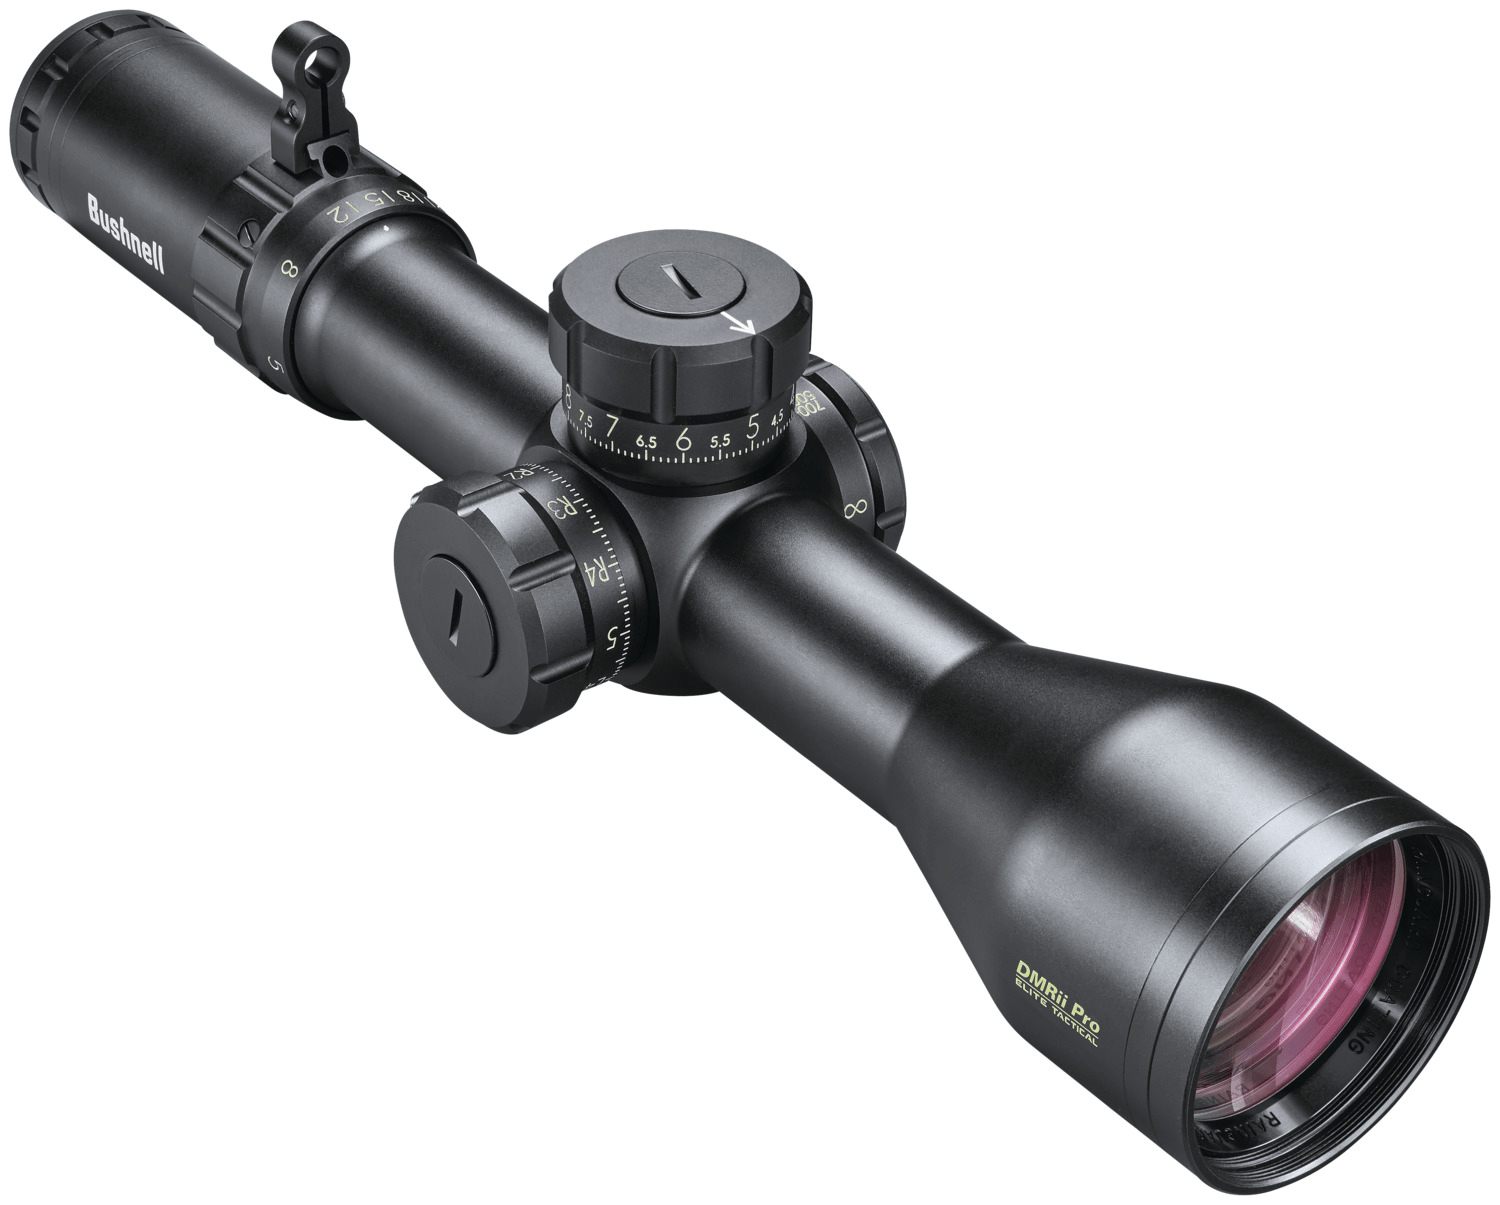 Bushnell Elite Tactical DMRii Pro 3.5-21x50 riflescope on a white background.